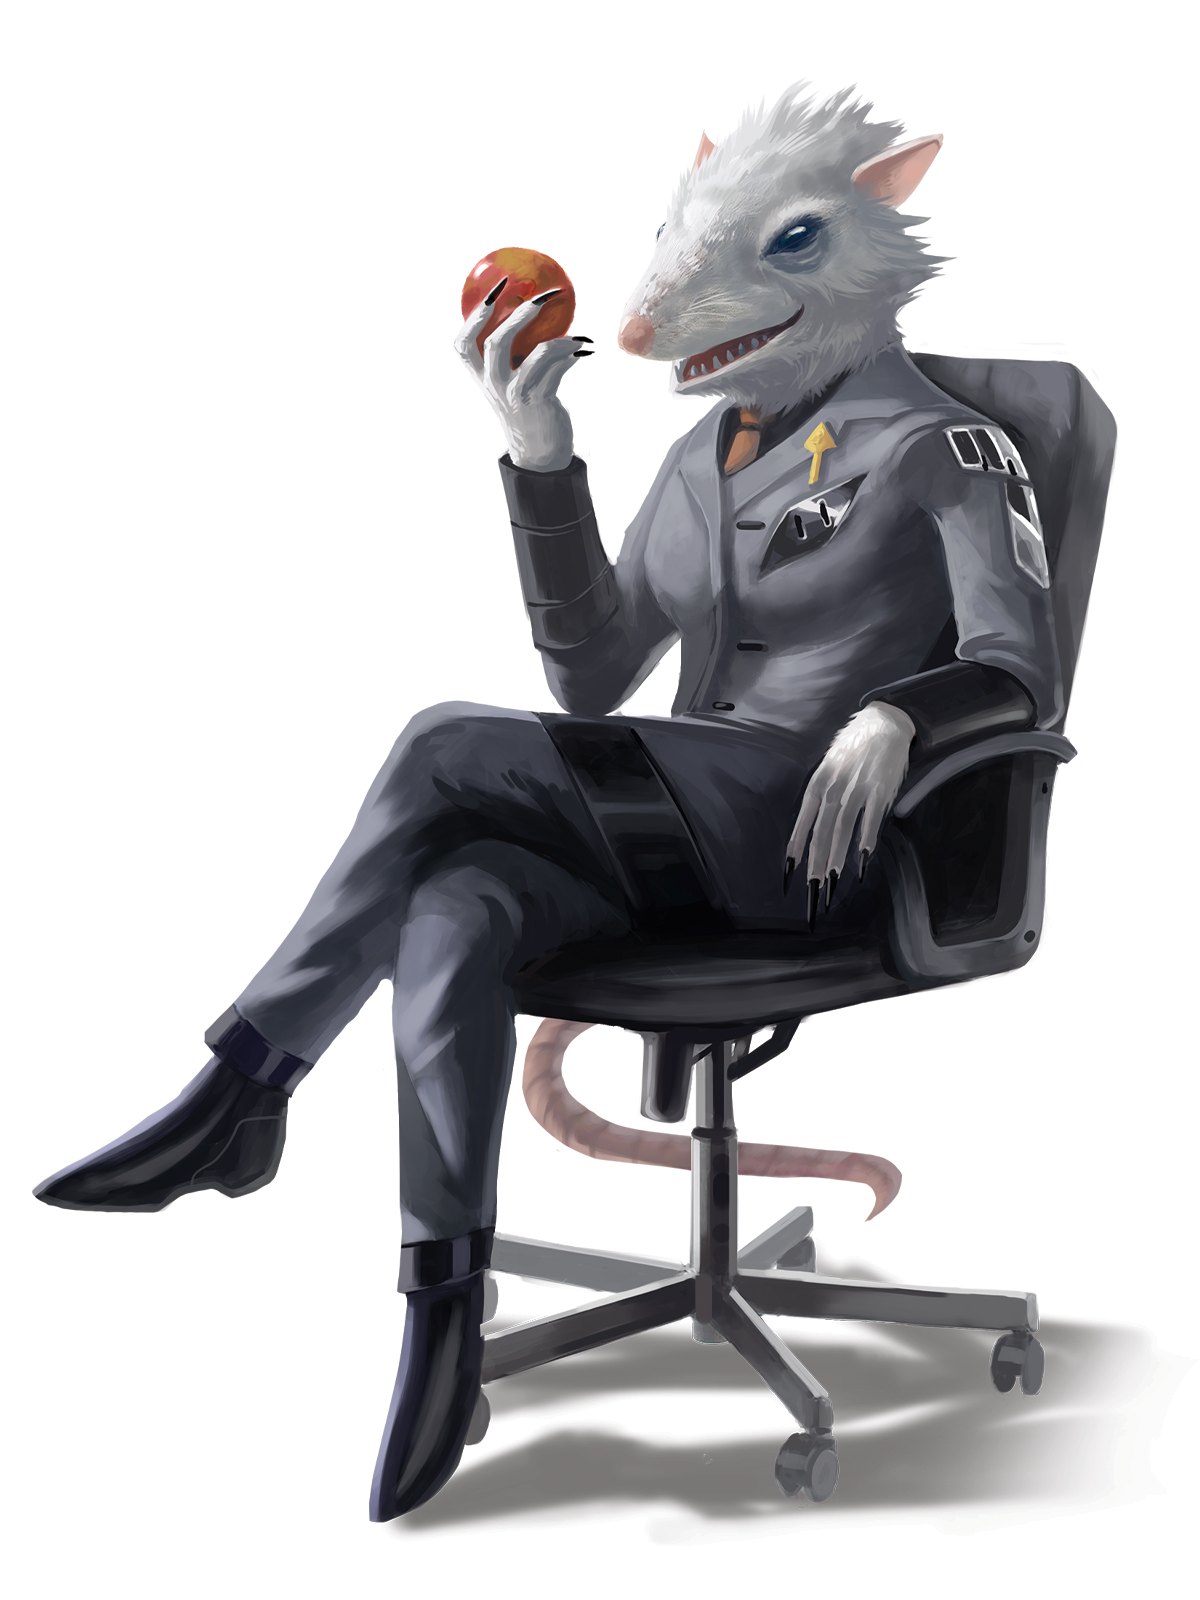 Starfinder, white furred, ysoki sitting in an officers uniform with an apple in her hand